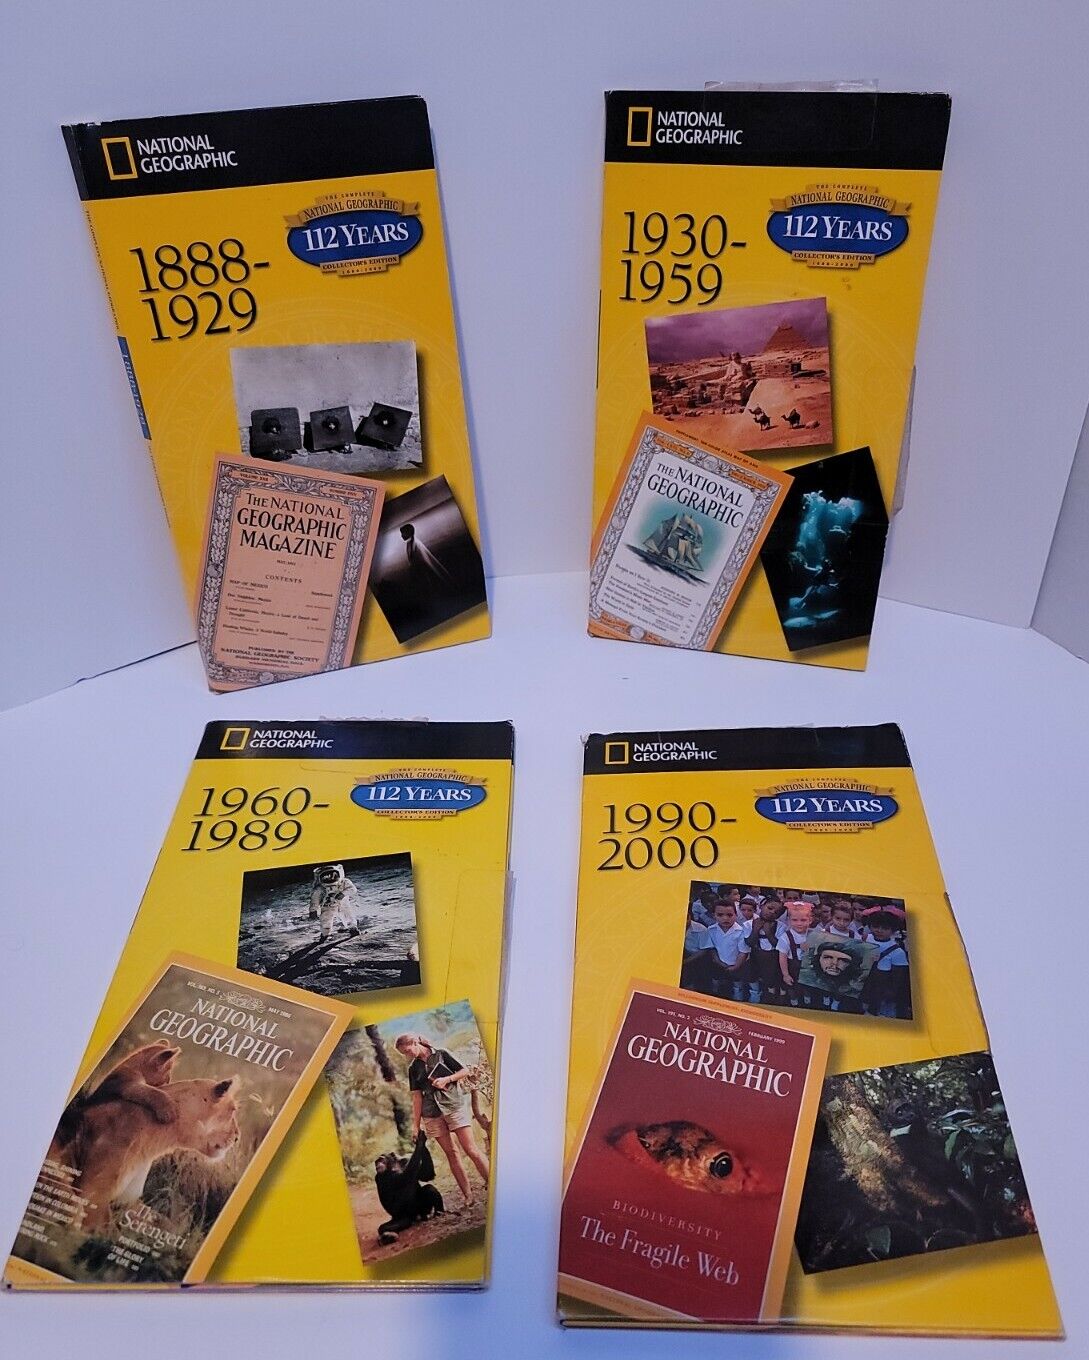 NATIONAL GEOGRAPHIC 112 Year 32 DISC CD-Rom Collectors Set 1888-2000